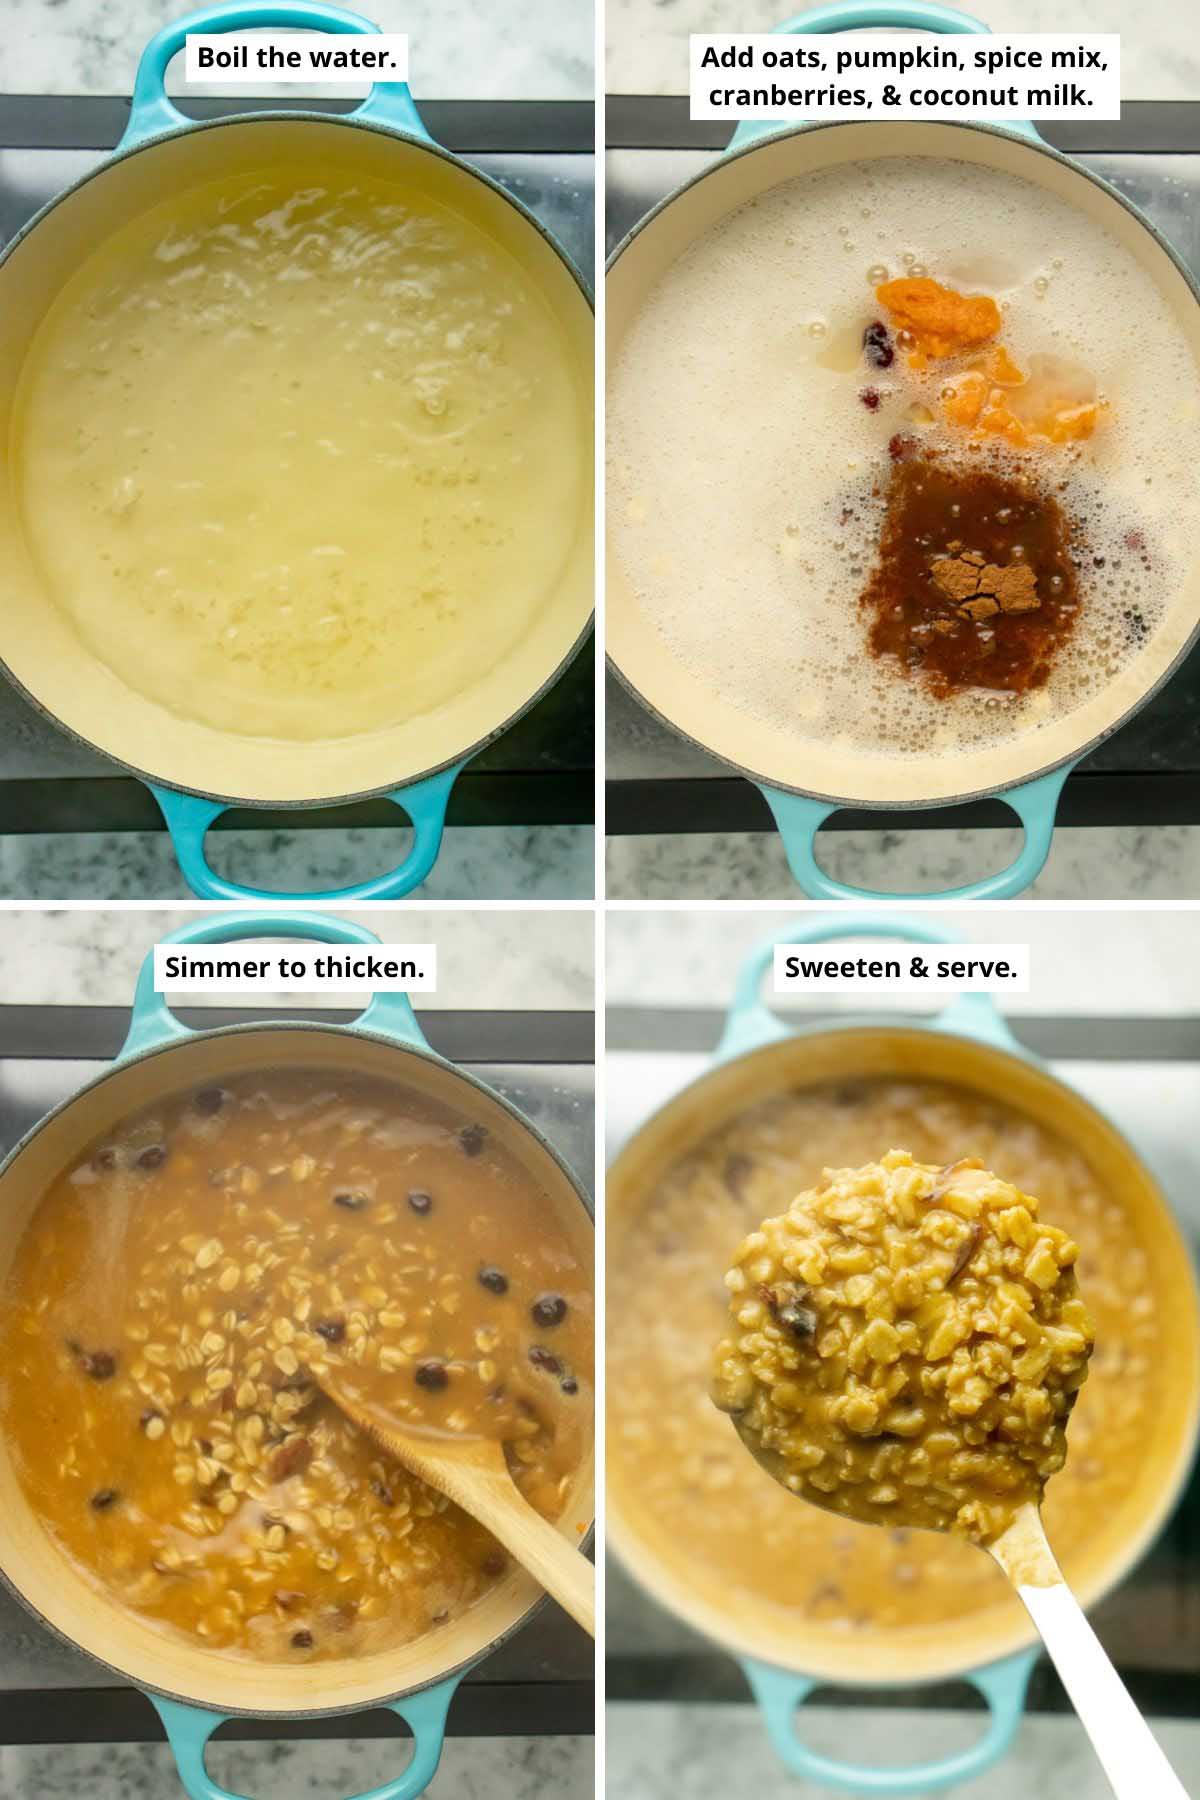 image collage showing boiling water, adding the oatmeal ingredients, the pumpkin oatmeal after thickening, and serving it with a ladle